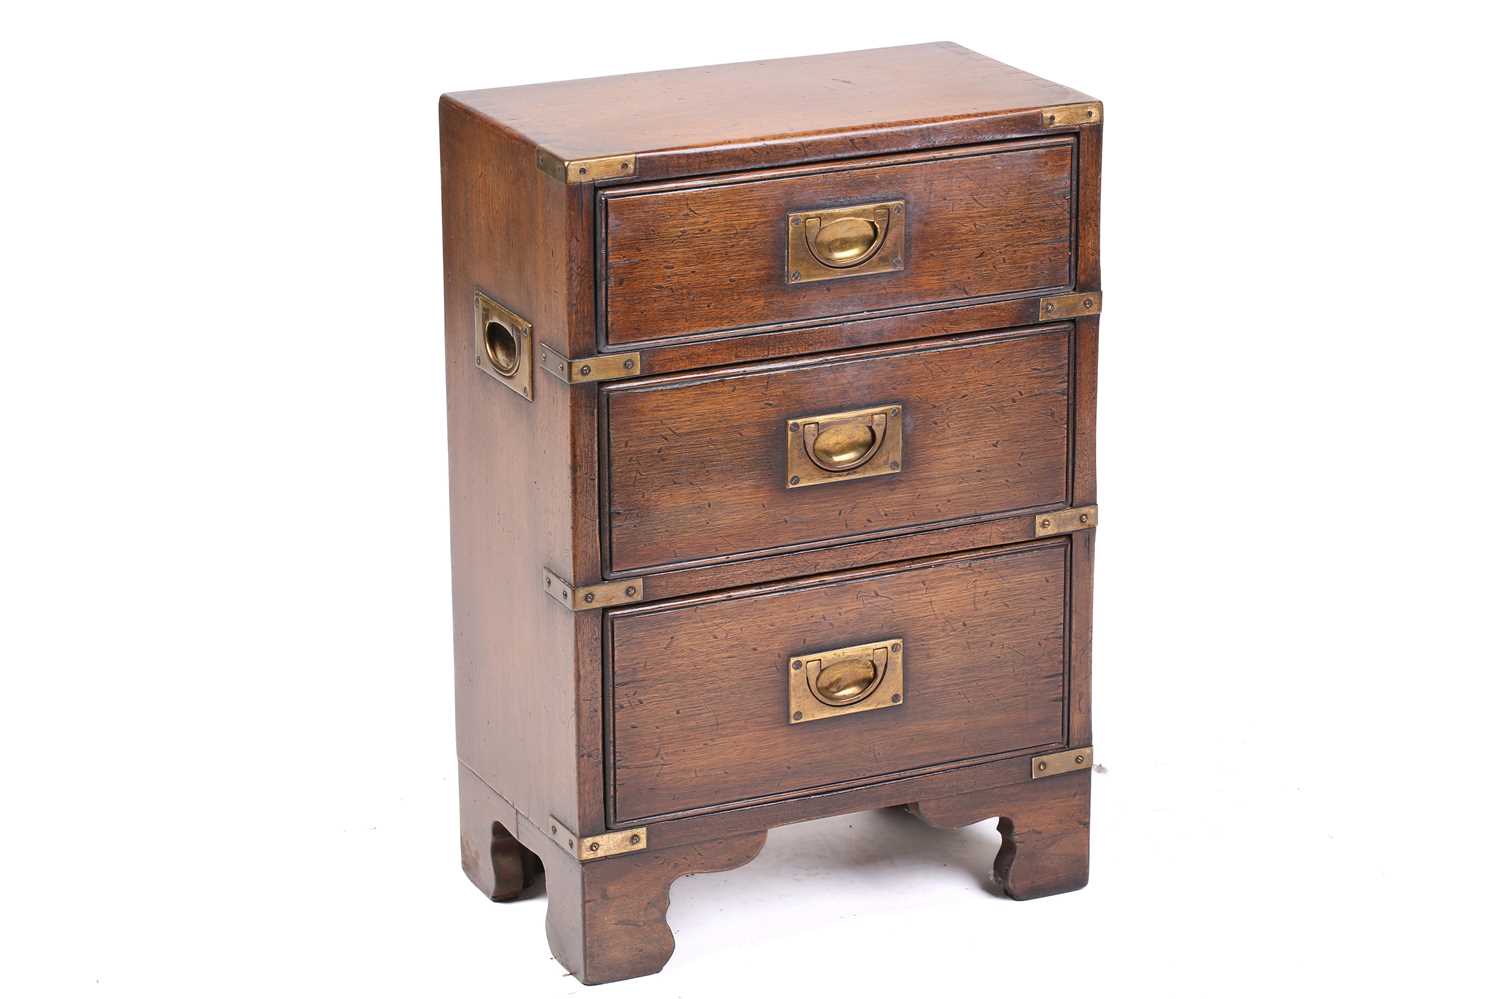 A small brass-bound mahogany campaign style three-drawer pedestal chest of drawers, 20th century, - Image 2 of 10